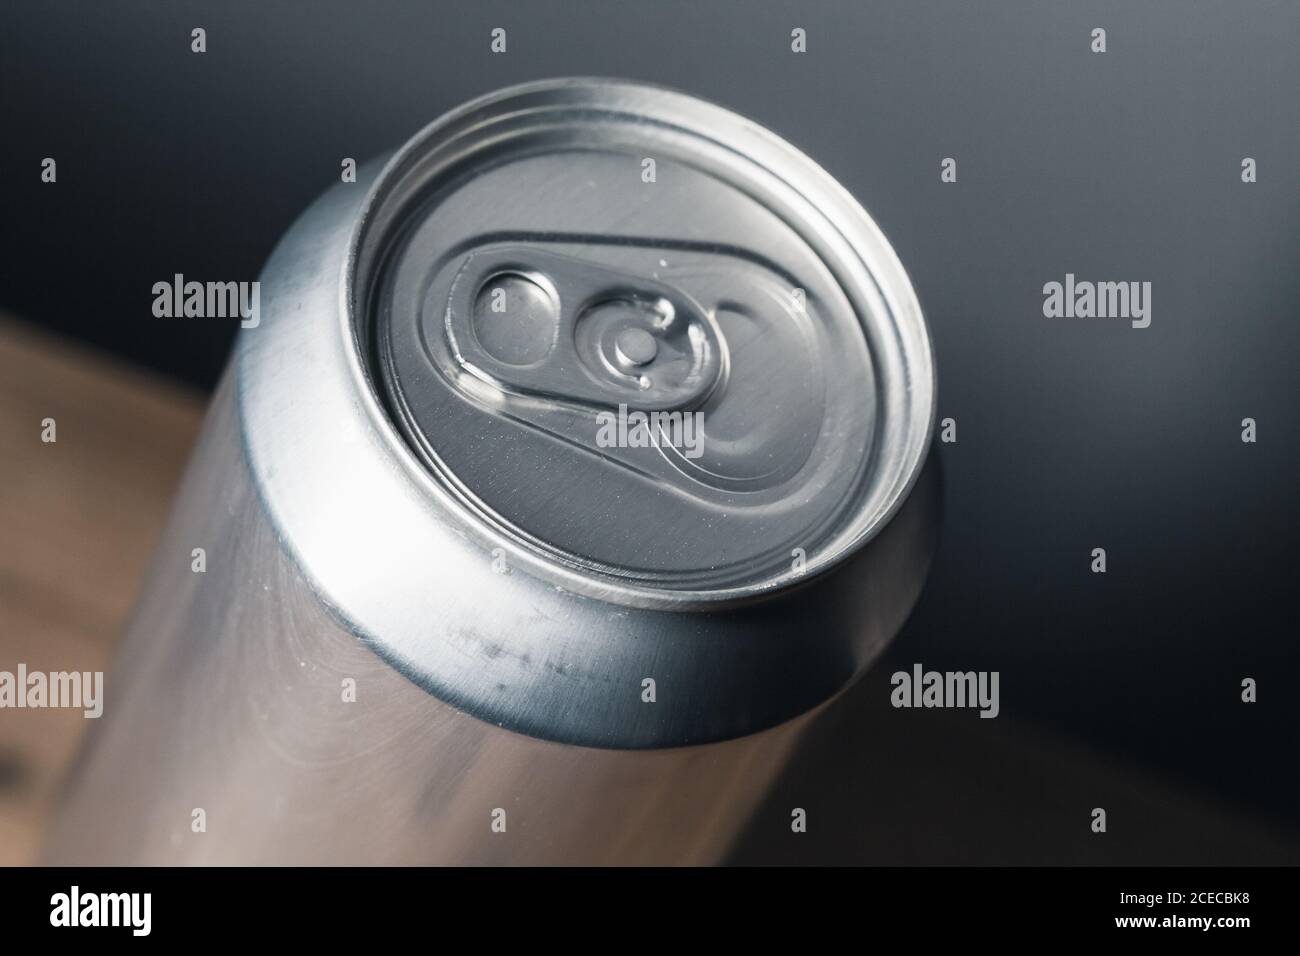 Closed shiny aluminum can, standard soft drink packaging Stock Photo